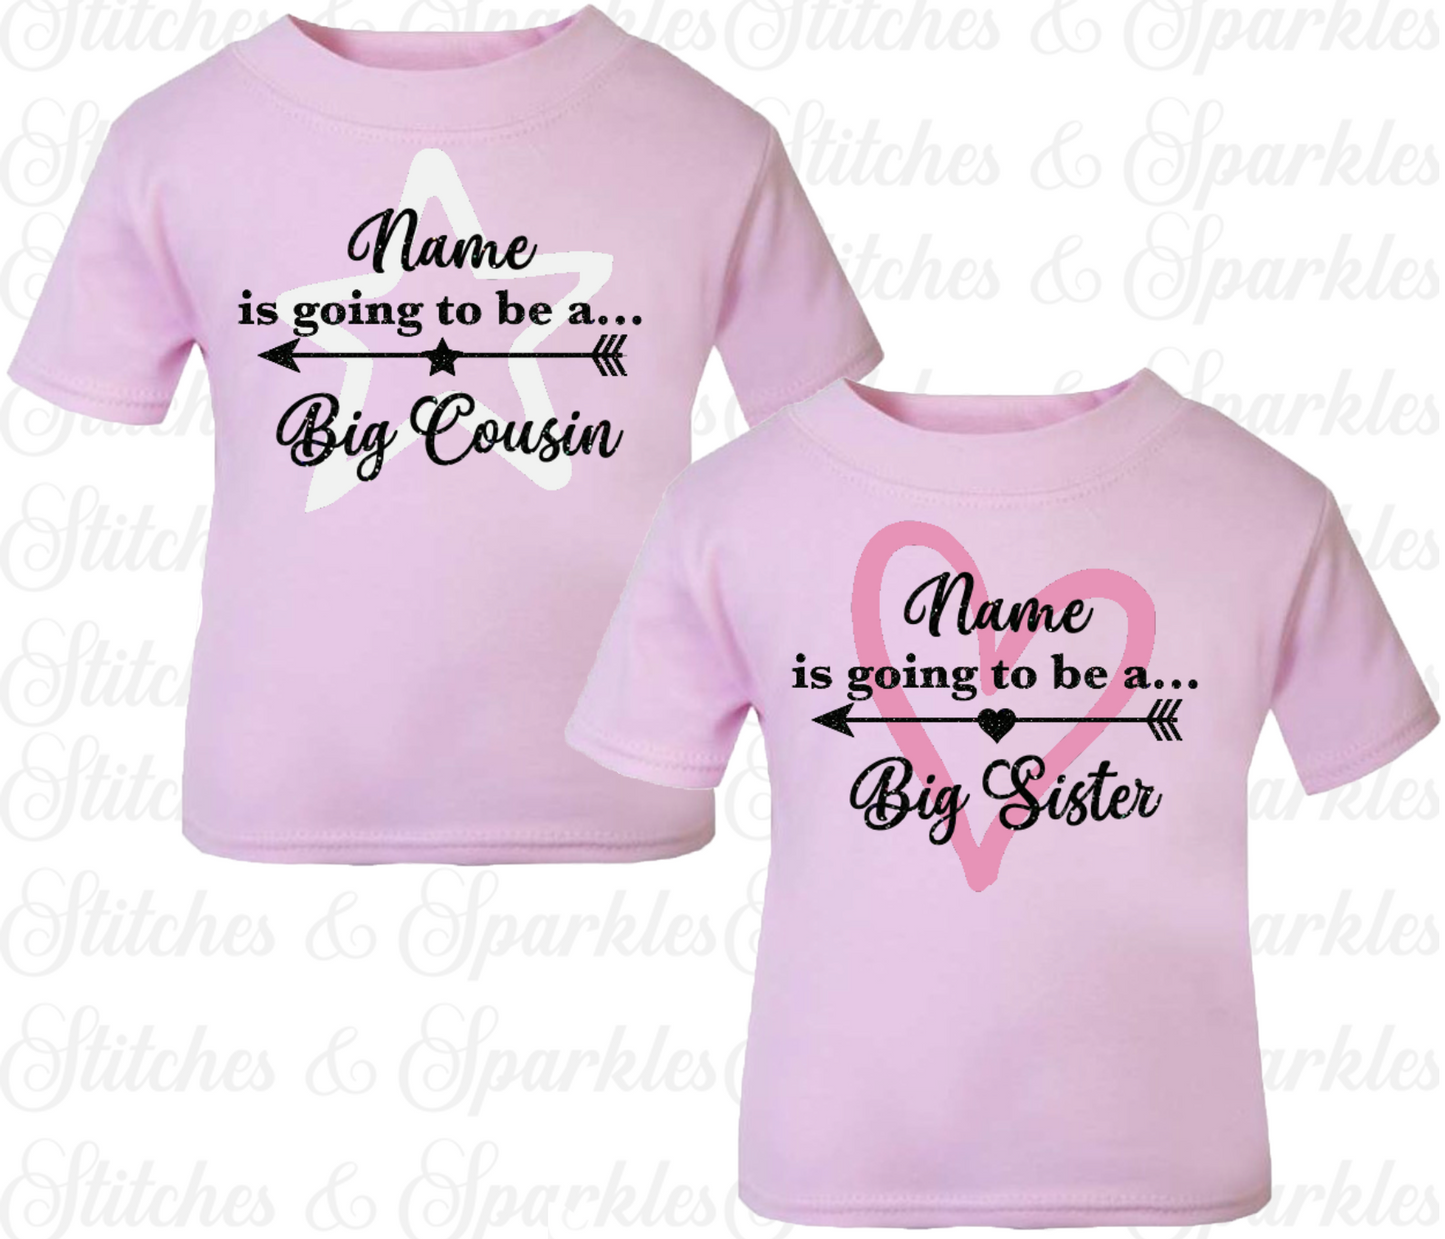 I'm going to be a... Big Sister / Brother / Cousin T-shirt